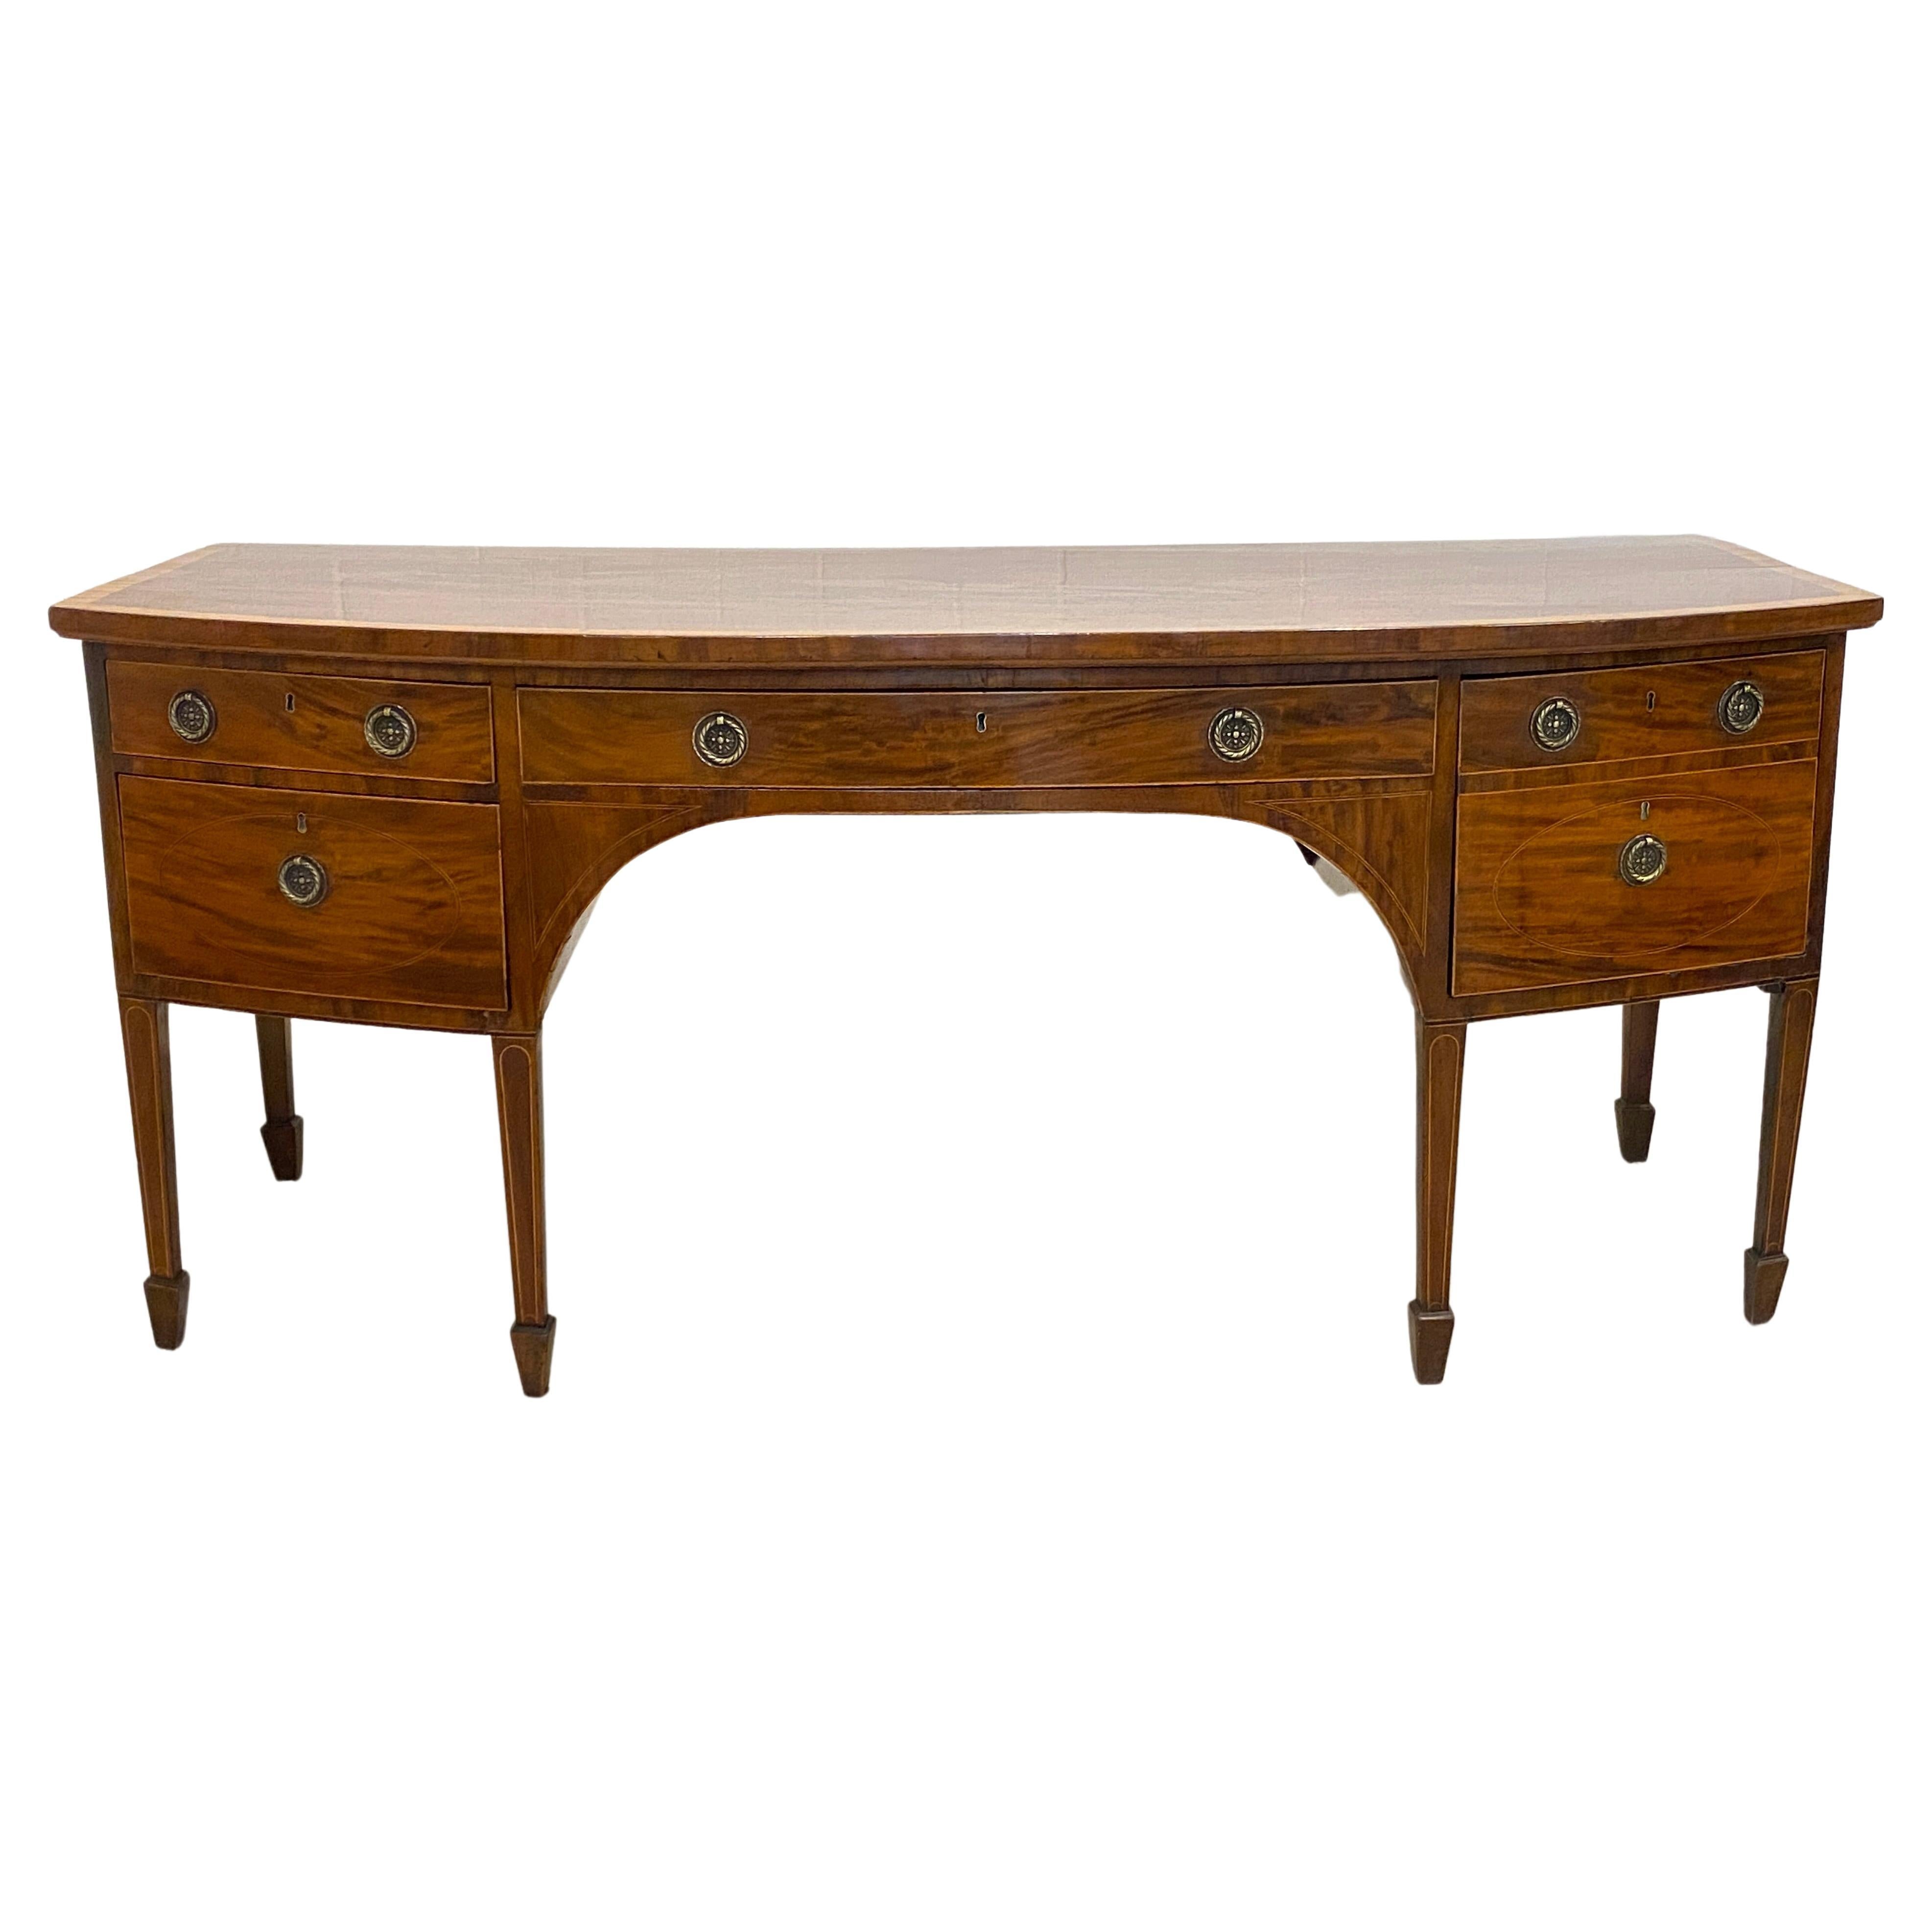 A beautiful 18th century style banded top mahogany English, Georgian sideboard. 
This sideboard is an antique of large proportions, with the traditional graceful lines of a bowed front classic.  Lots of original patina gives this gem the character